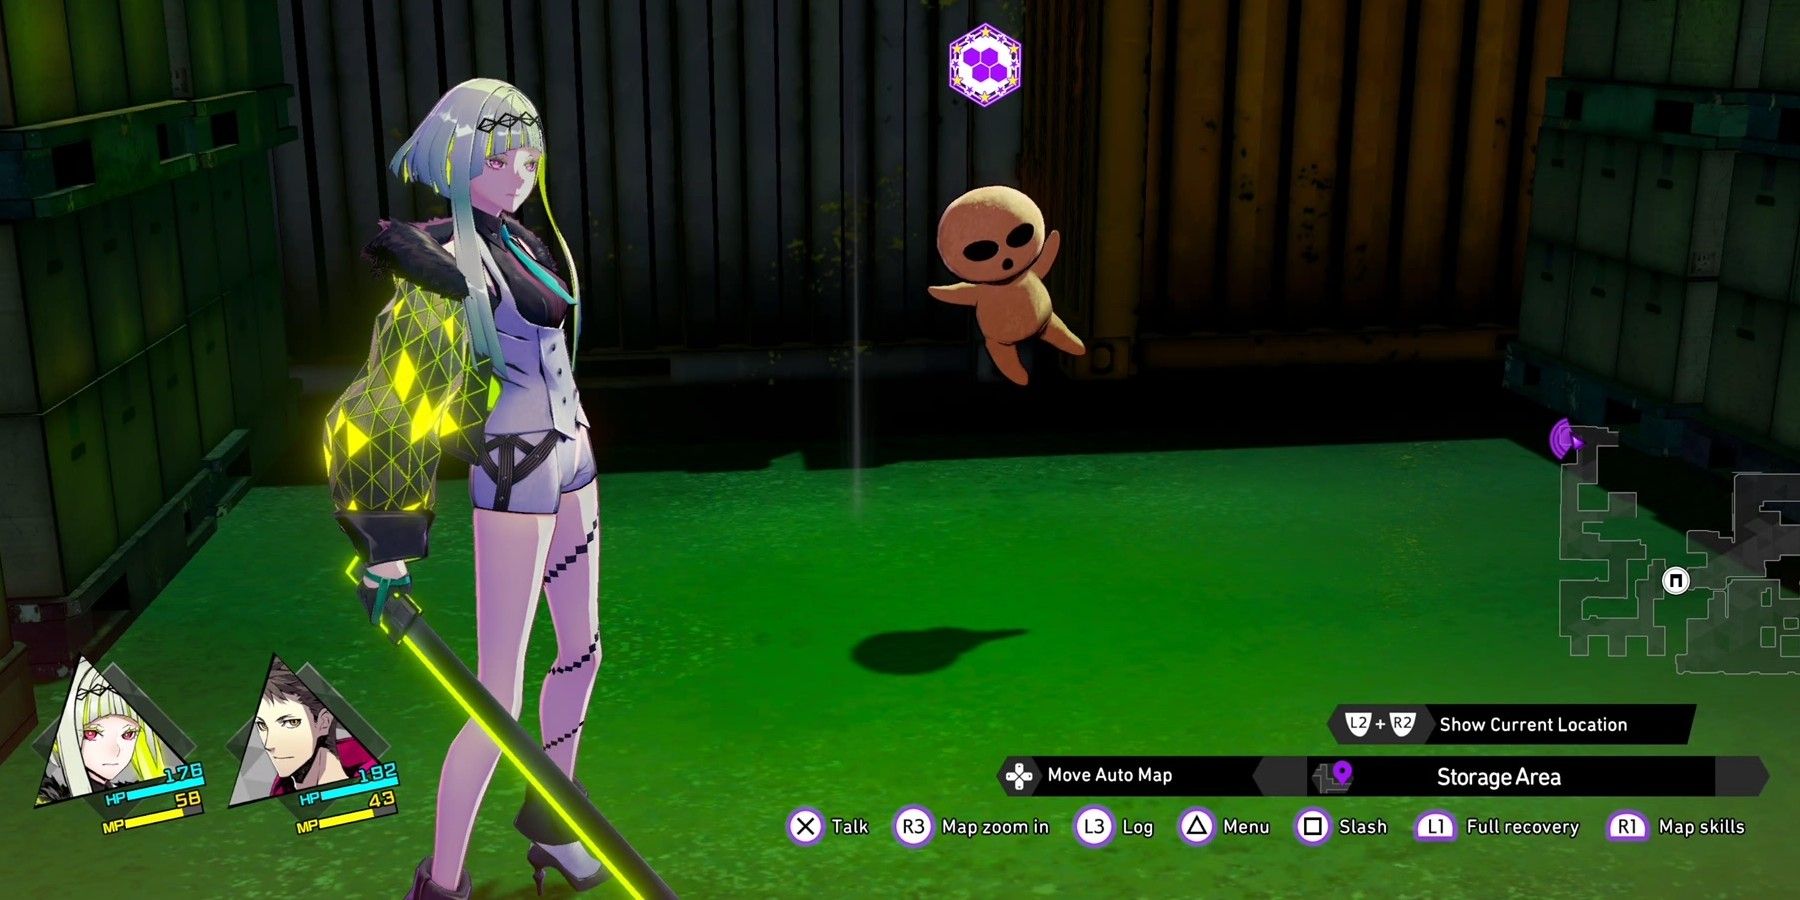 Is Soul Hackers 2 a Persona Game?